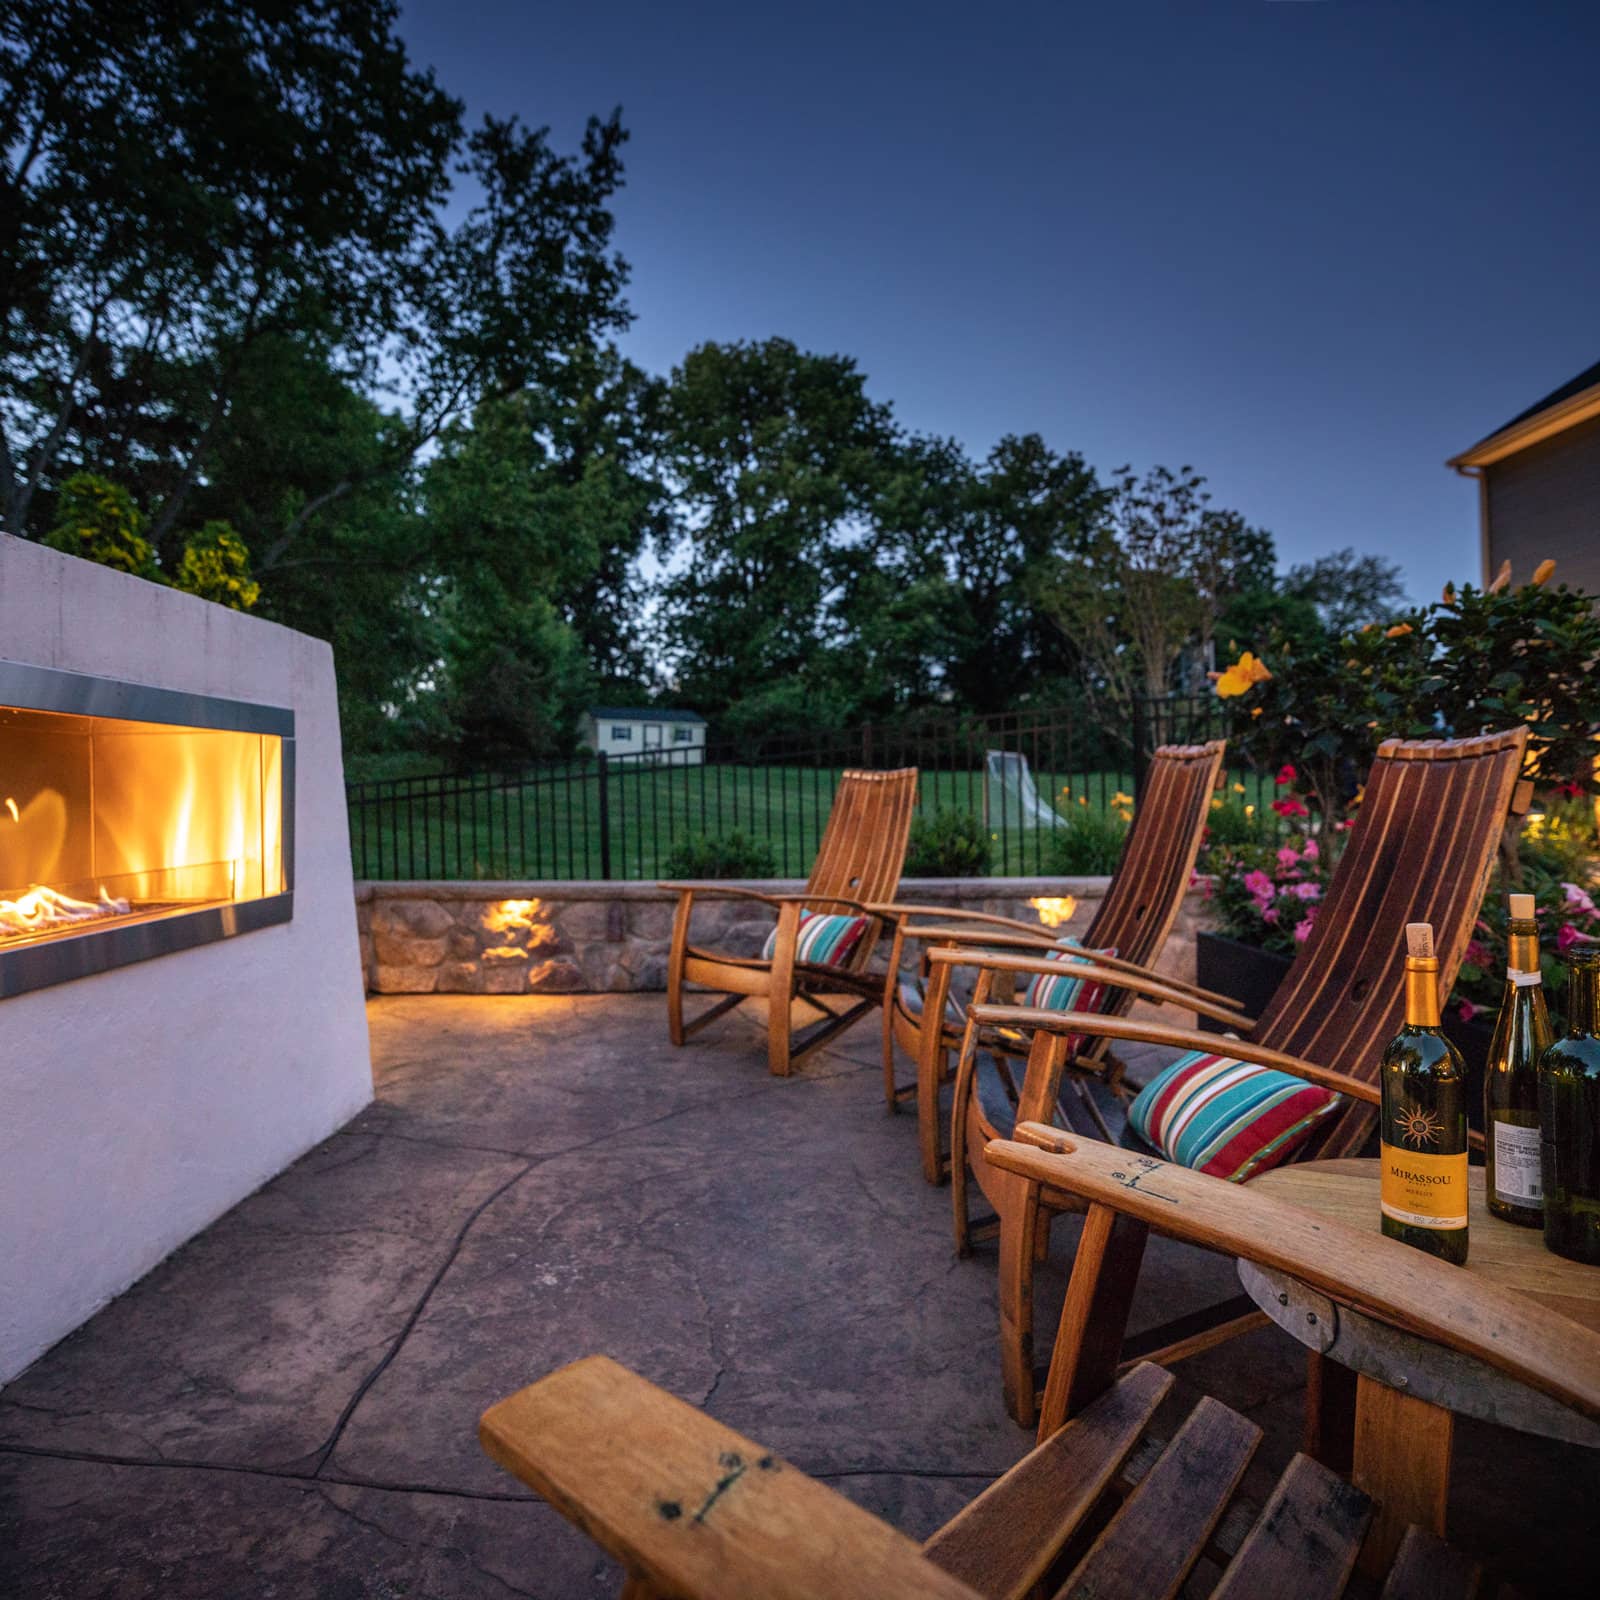 Chilly evenings have never felt so cozy and relaxing! This custom fireplace is a favorite backyard destination for this Royersford family.